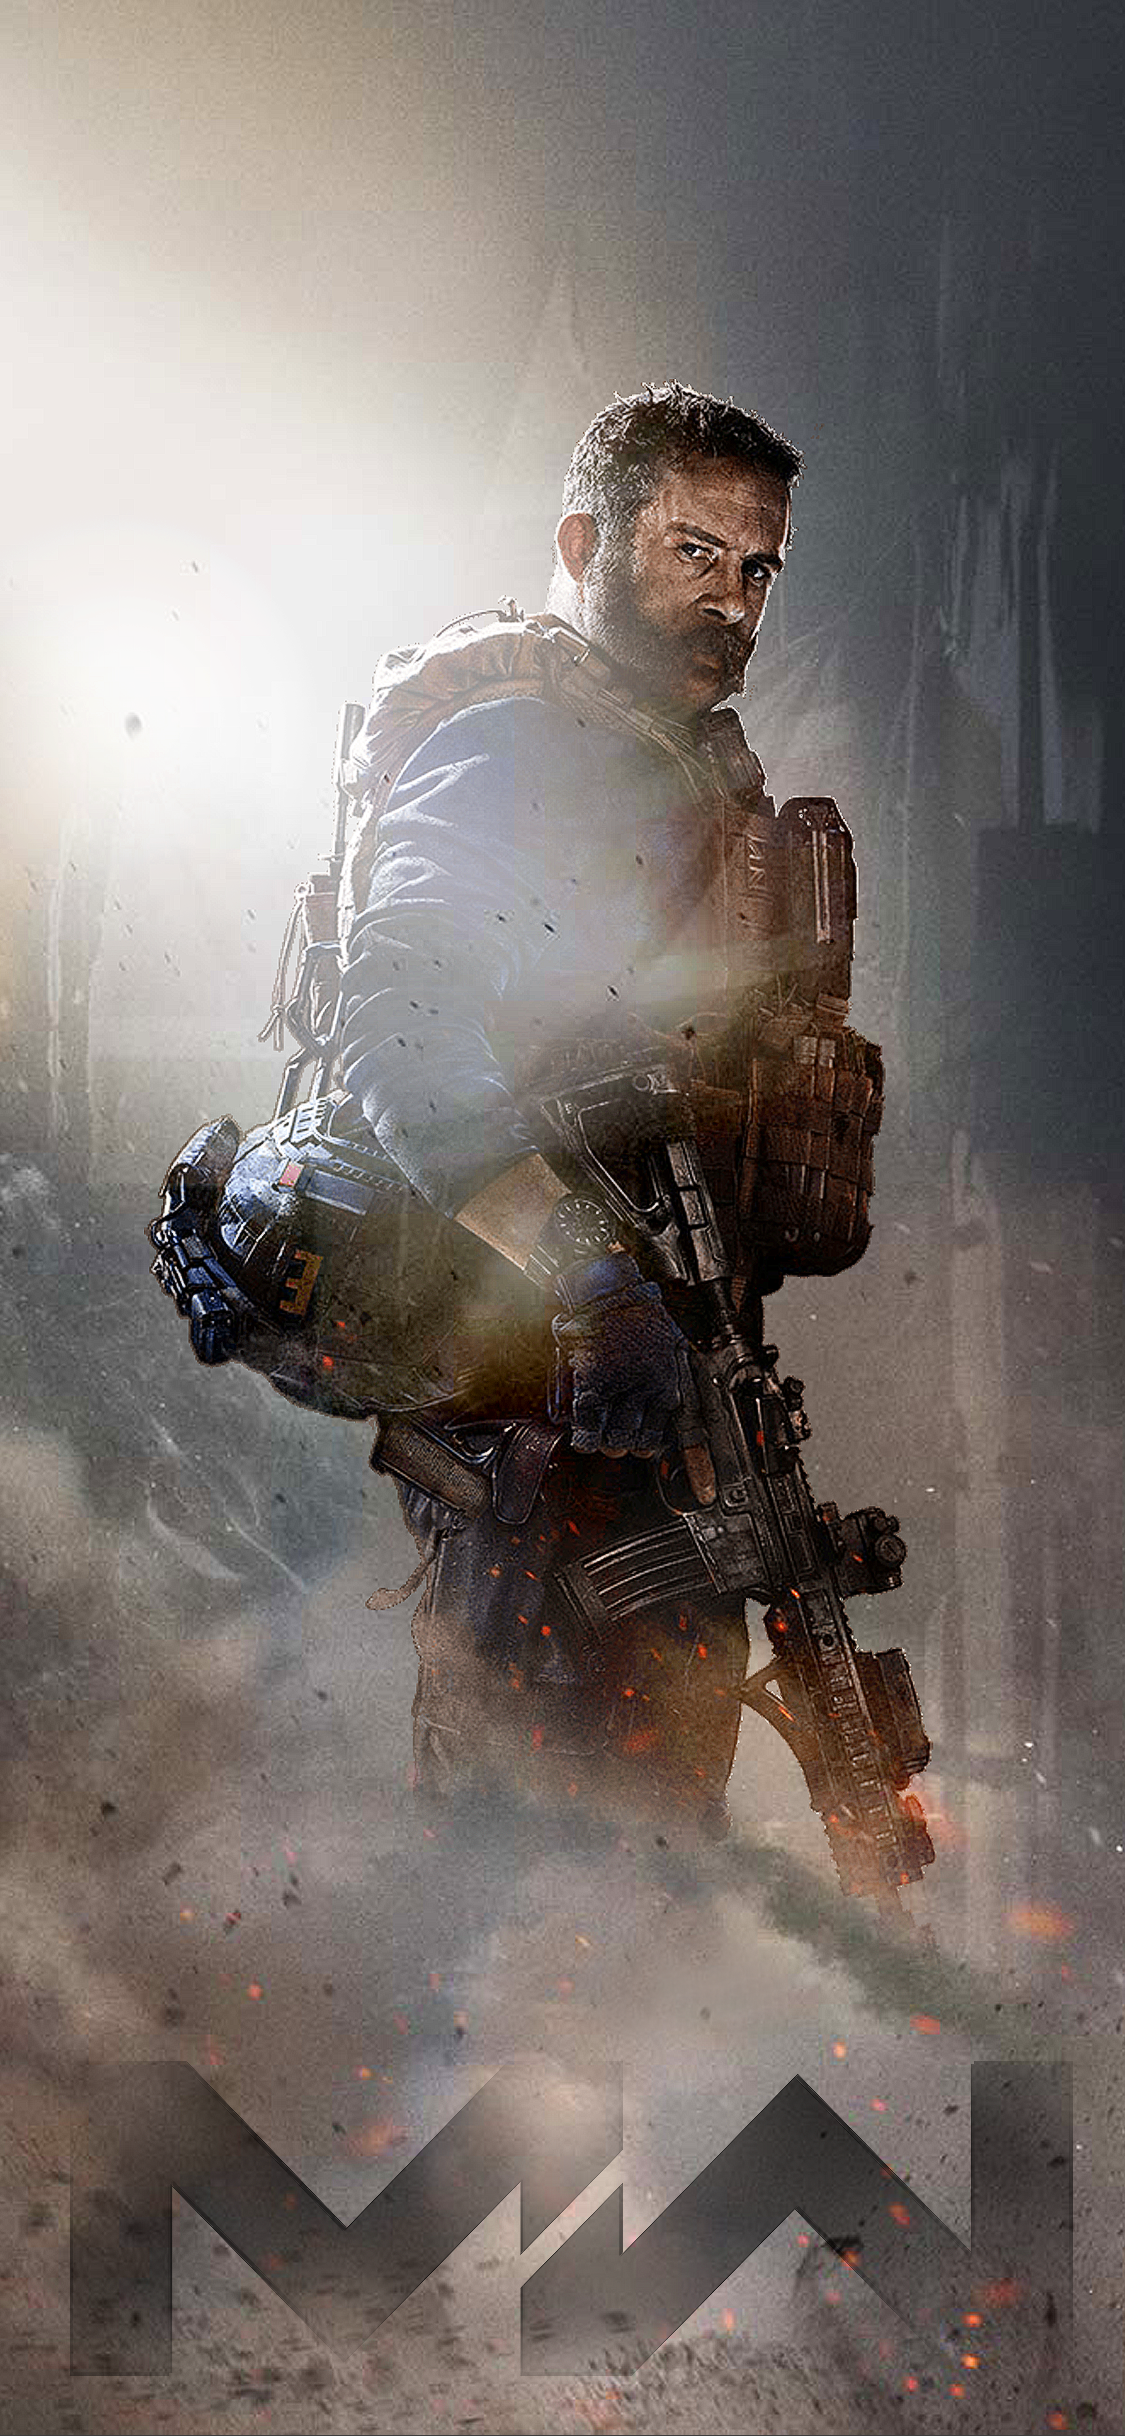 modern iphone wallpaper,soldier,movie,military,fictional character